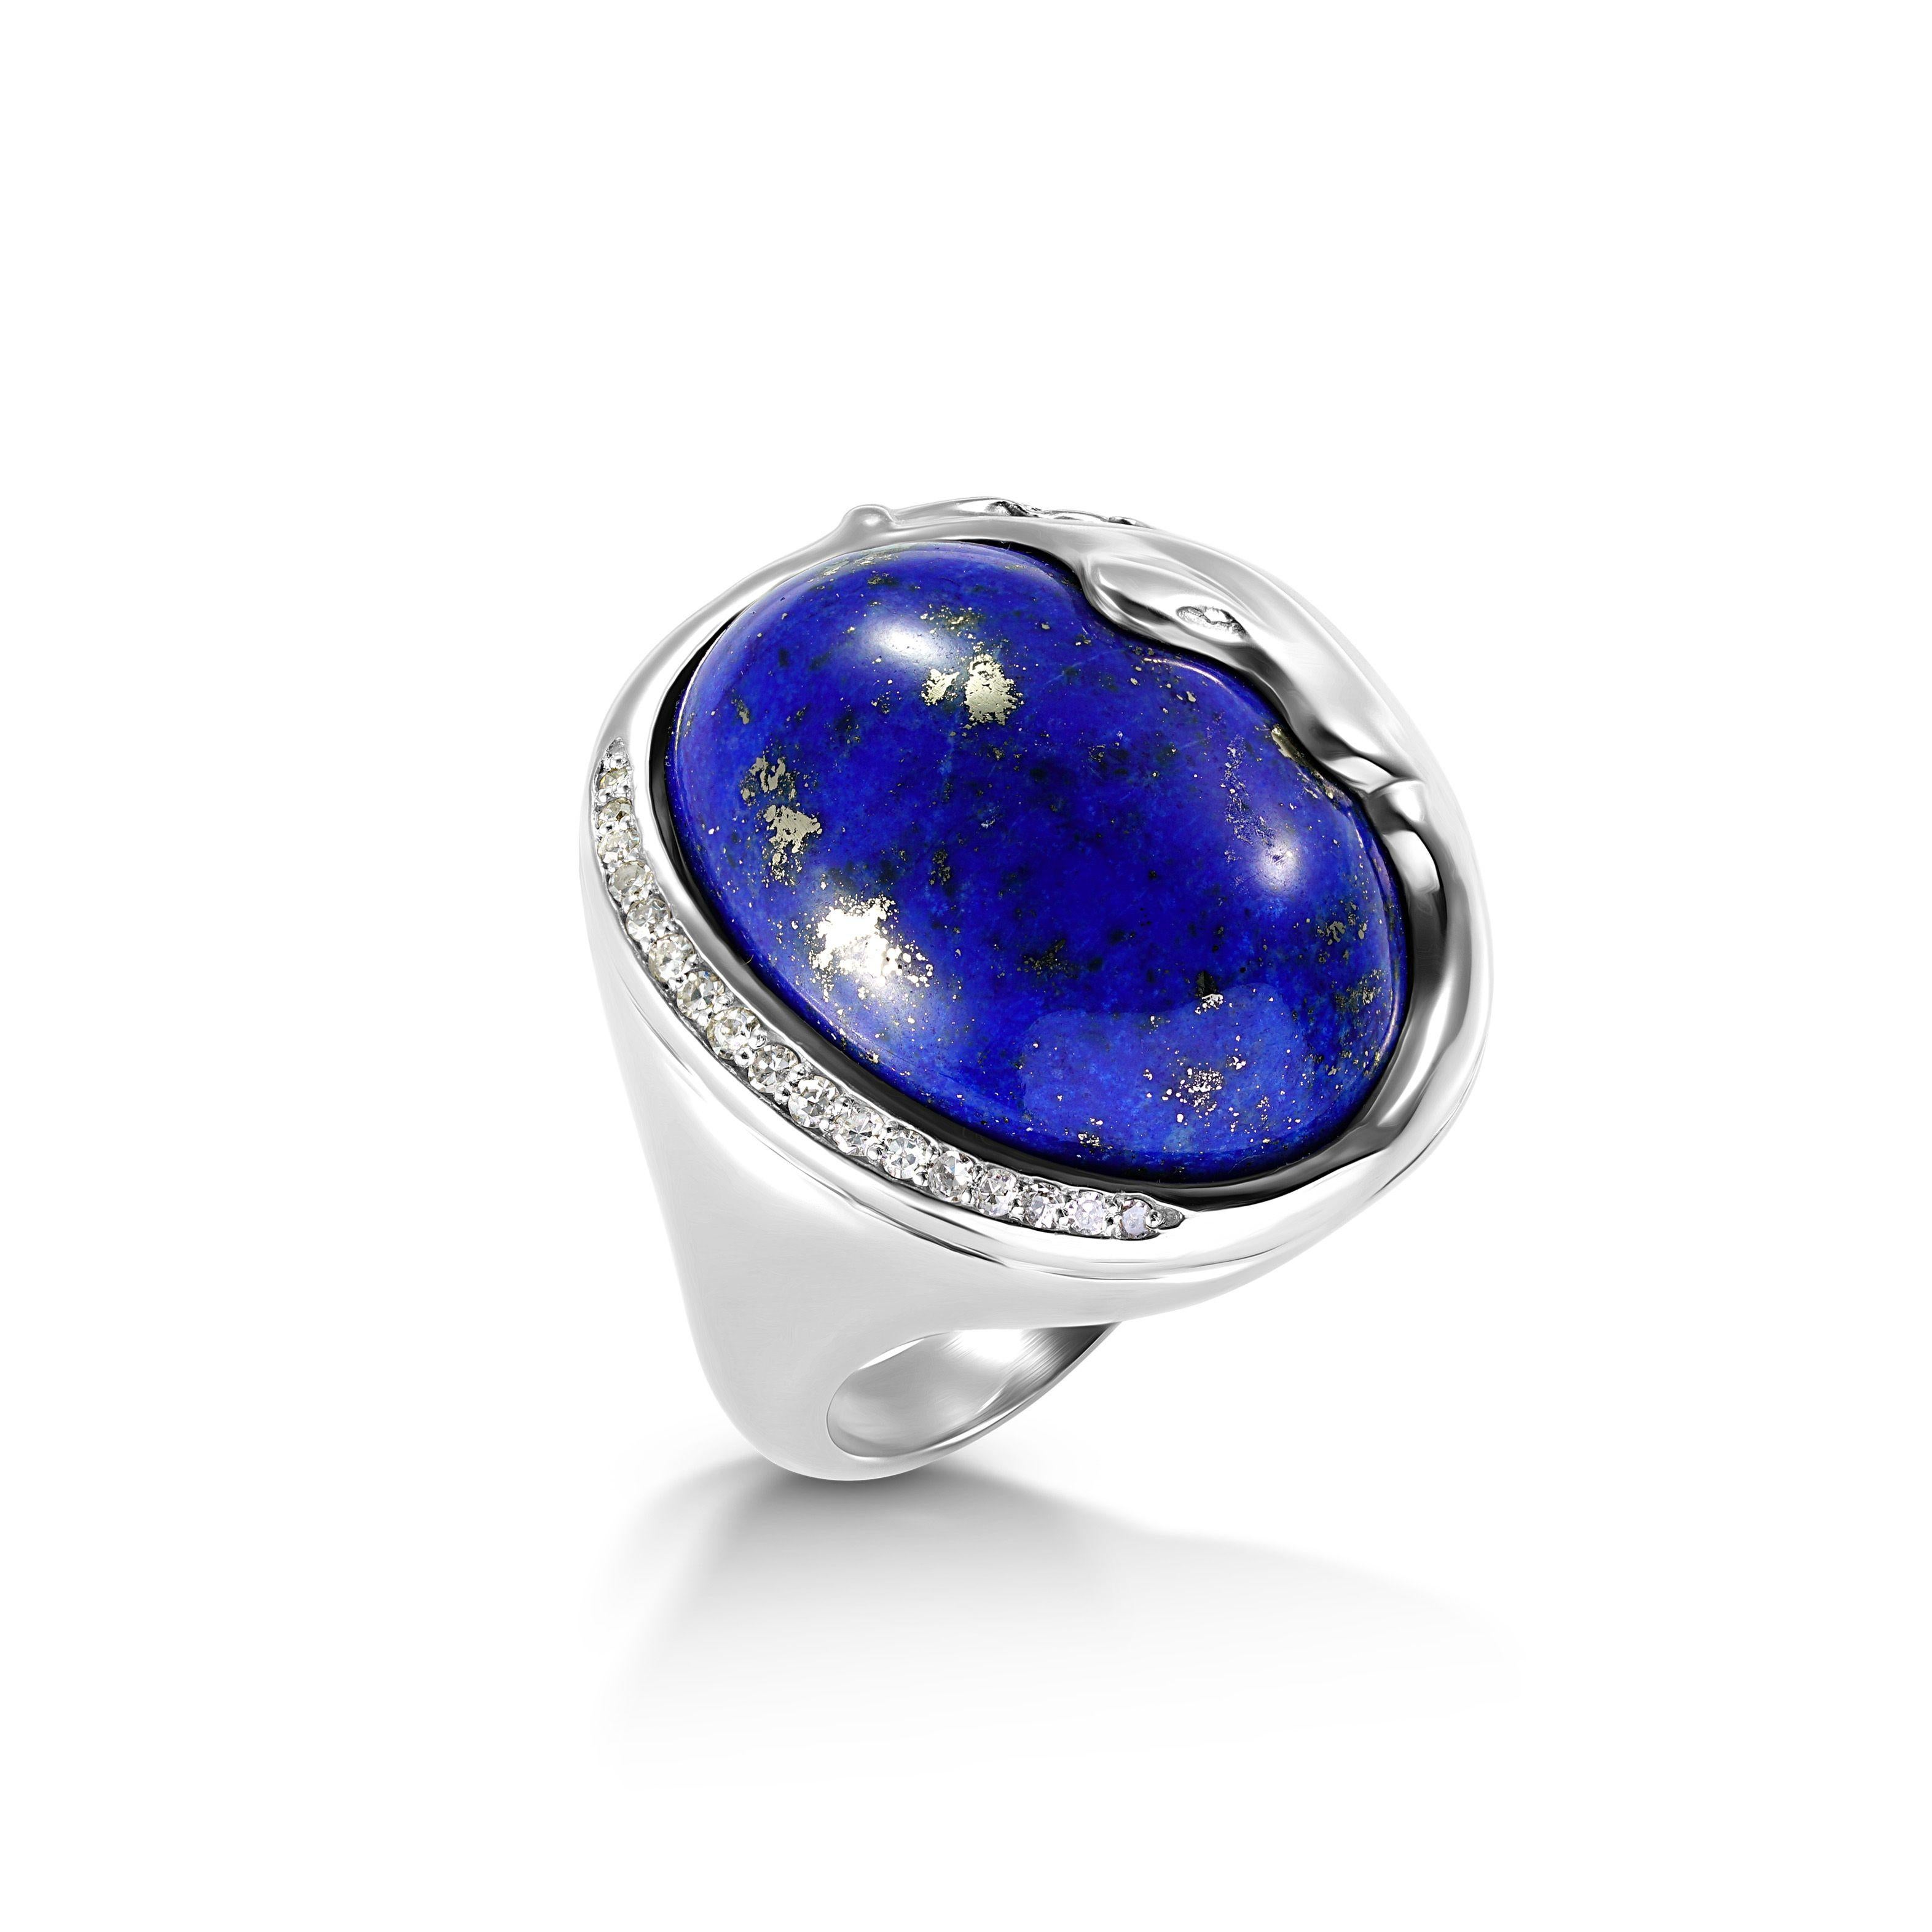 Simply Beautiful!  Lapis Lazuli and Diamond Cocktail Ring, securely centered by a 24 Carat Oval Lapis Lazuli Gemstone, one side accented by Diamonds, approx. 0.10tcw. Hand crafted 18K White Gold mounting. Ring size 8.5, we offer ring resizing. More